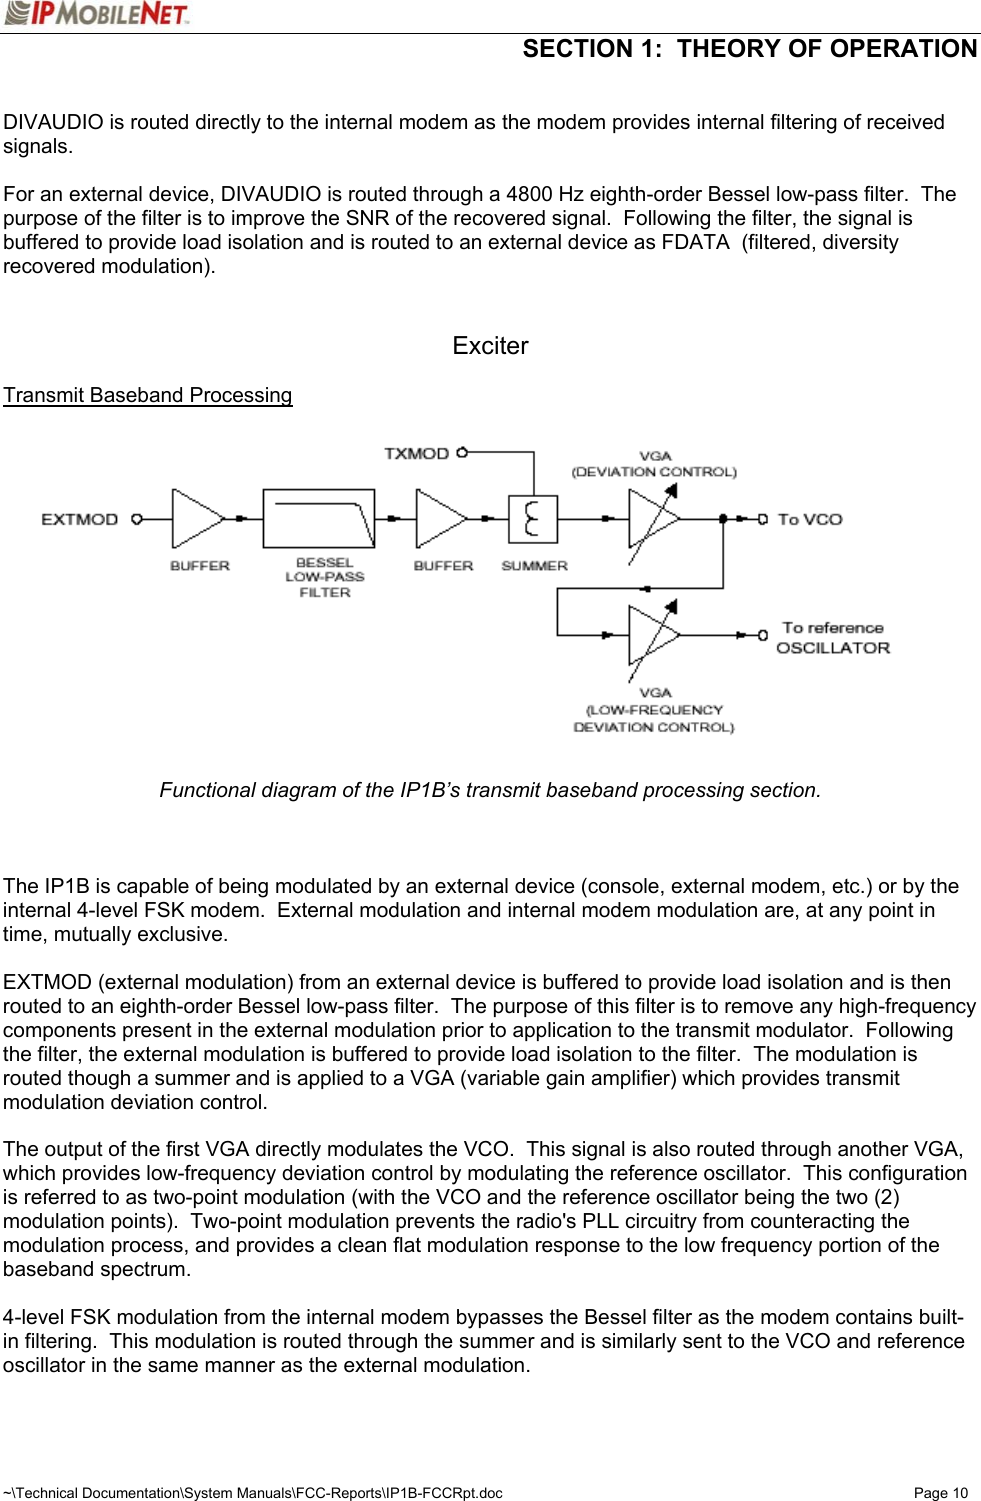  SECTION 1:  THEORY OF OPERATION  ~\Technical Documentation\System Manuals\FCC-Reports\IP1B-FCCRpt.doc  Page 10  DIVAUDIO is routed directly to the internal modem as the modem provides internal filtering of received signals.  For an external device, DIVAUDIO is routed through a 4800 Hz eighth-order Bessel low-pass filter.  The purpose of the filter is to improve the SNR of the recovered signal.  Following the filter, the signal is buffered to provide load isolation and is routed to an external device as FDATA  (filtered, diversity recovered modulation).   Exciter  Transmit Baseband Processing  Functional diagram of the IP1B’s transmit baseband processing section.    The IP1B is capable of being modulated by an external device (console, external modem, etc.) or by the internal 4-level FSK modem.  External modulation and internal modem modulation are, at any point in time, mutually exclusive.  EXTMOD (external modulation) from an external device is buffered to provide load isolation and is then routed to an eighth-order Bessel low-pass filter.  The purpose of this filter is to remove any high-frequency components present in the external modulation prior to application to the transmit modulator.  Following the filter, the external modulation is buffered to provide load isolation to the filter.  The modulation is routed though a summer and is applied to a VGA (variable gain amplifier) which provides transmit modulation deviation control.  The output of the first VGA directly modulates the VCO.  This signal is also routed through another VGA, which provides low-frequency deviation control by modulating the reference oscillator.  This configuration is referred to as two-point modulation (with the VCO and the reference oscillator being the two (2) modulation points).  Two-point modulation prevents the radio&apos;s PLL circuitry from counteracting the modulation process, and provides a clean flat modulation response to the low frequency portion of the baseband spectrum.  4-level FSK modulation from the internal modem bypasses the Bessel filter as the modem contains built-in filtering.  This modulation is routed through the summer and is similarly sent to the VCO and reference oscillator in the same manner as the external modulation.  